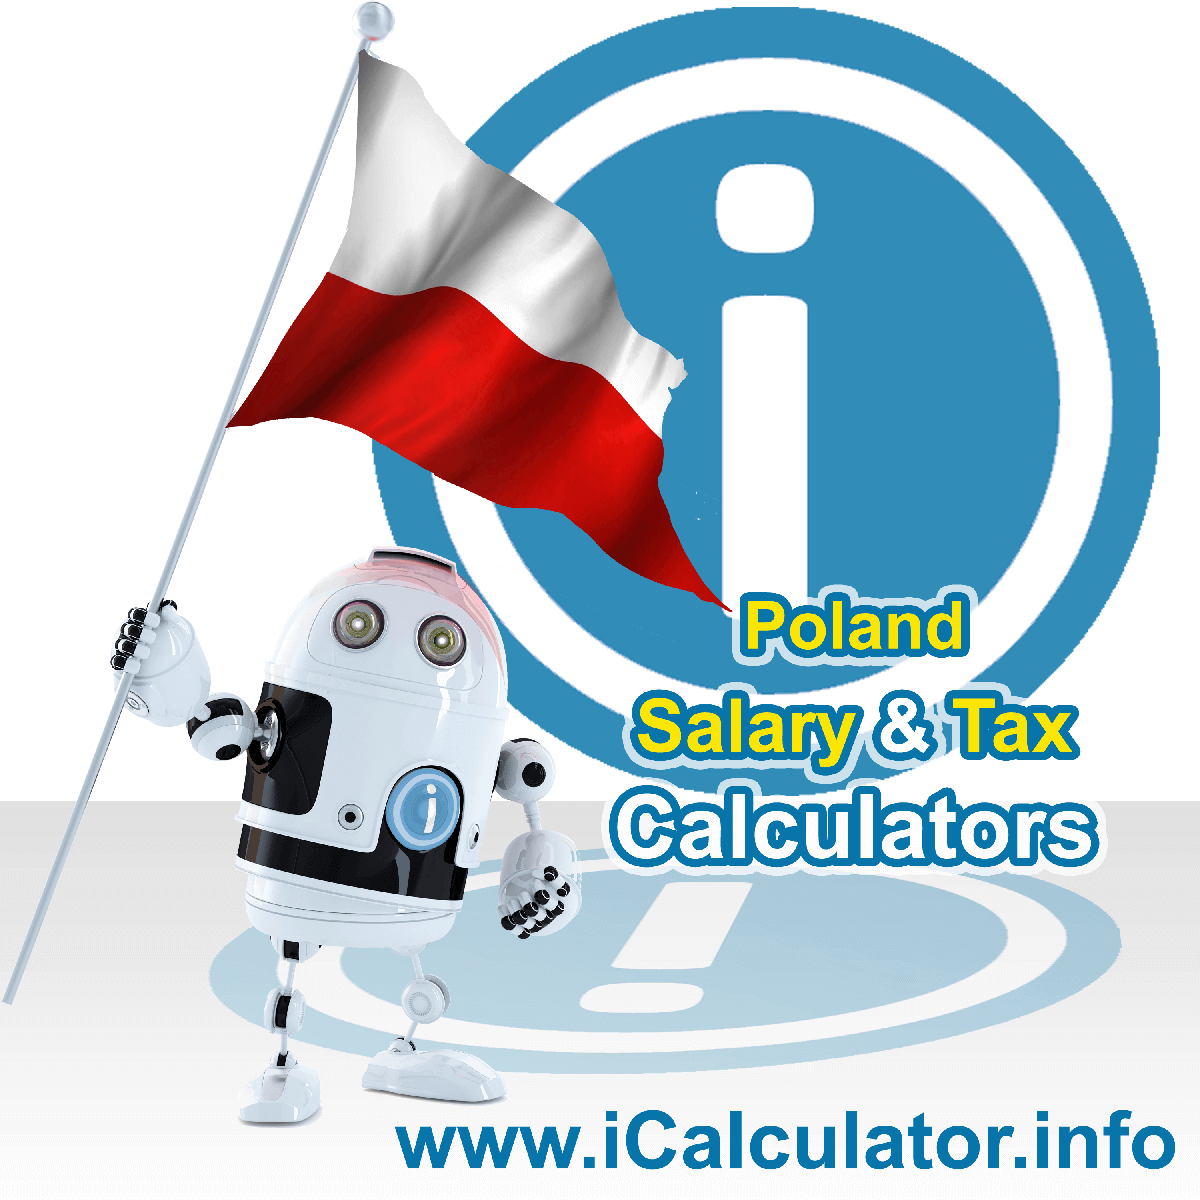 Poland Wage Calculator. This image shows the Poland flag and information relating to the tax formula for the Poland Tax Calculator